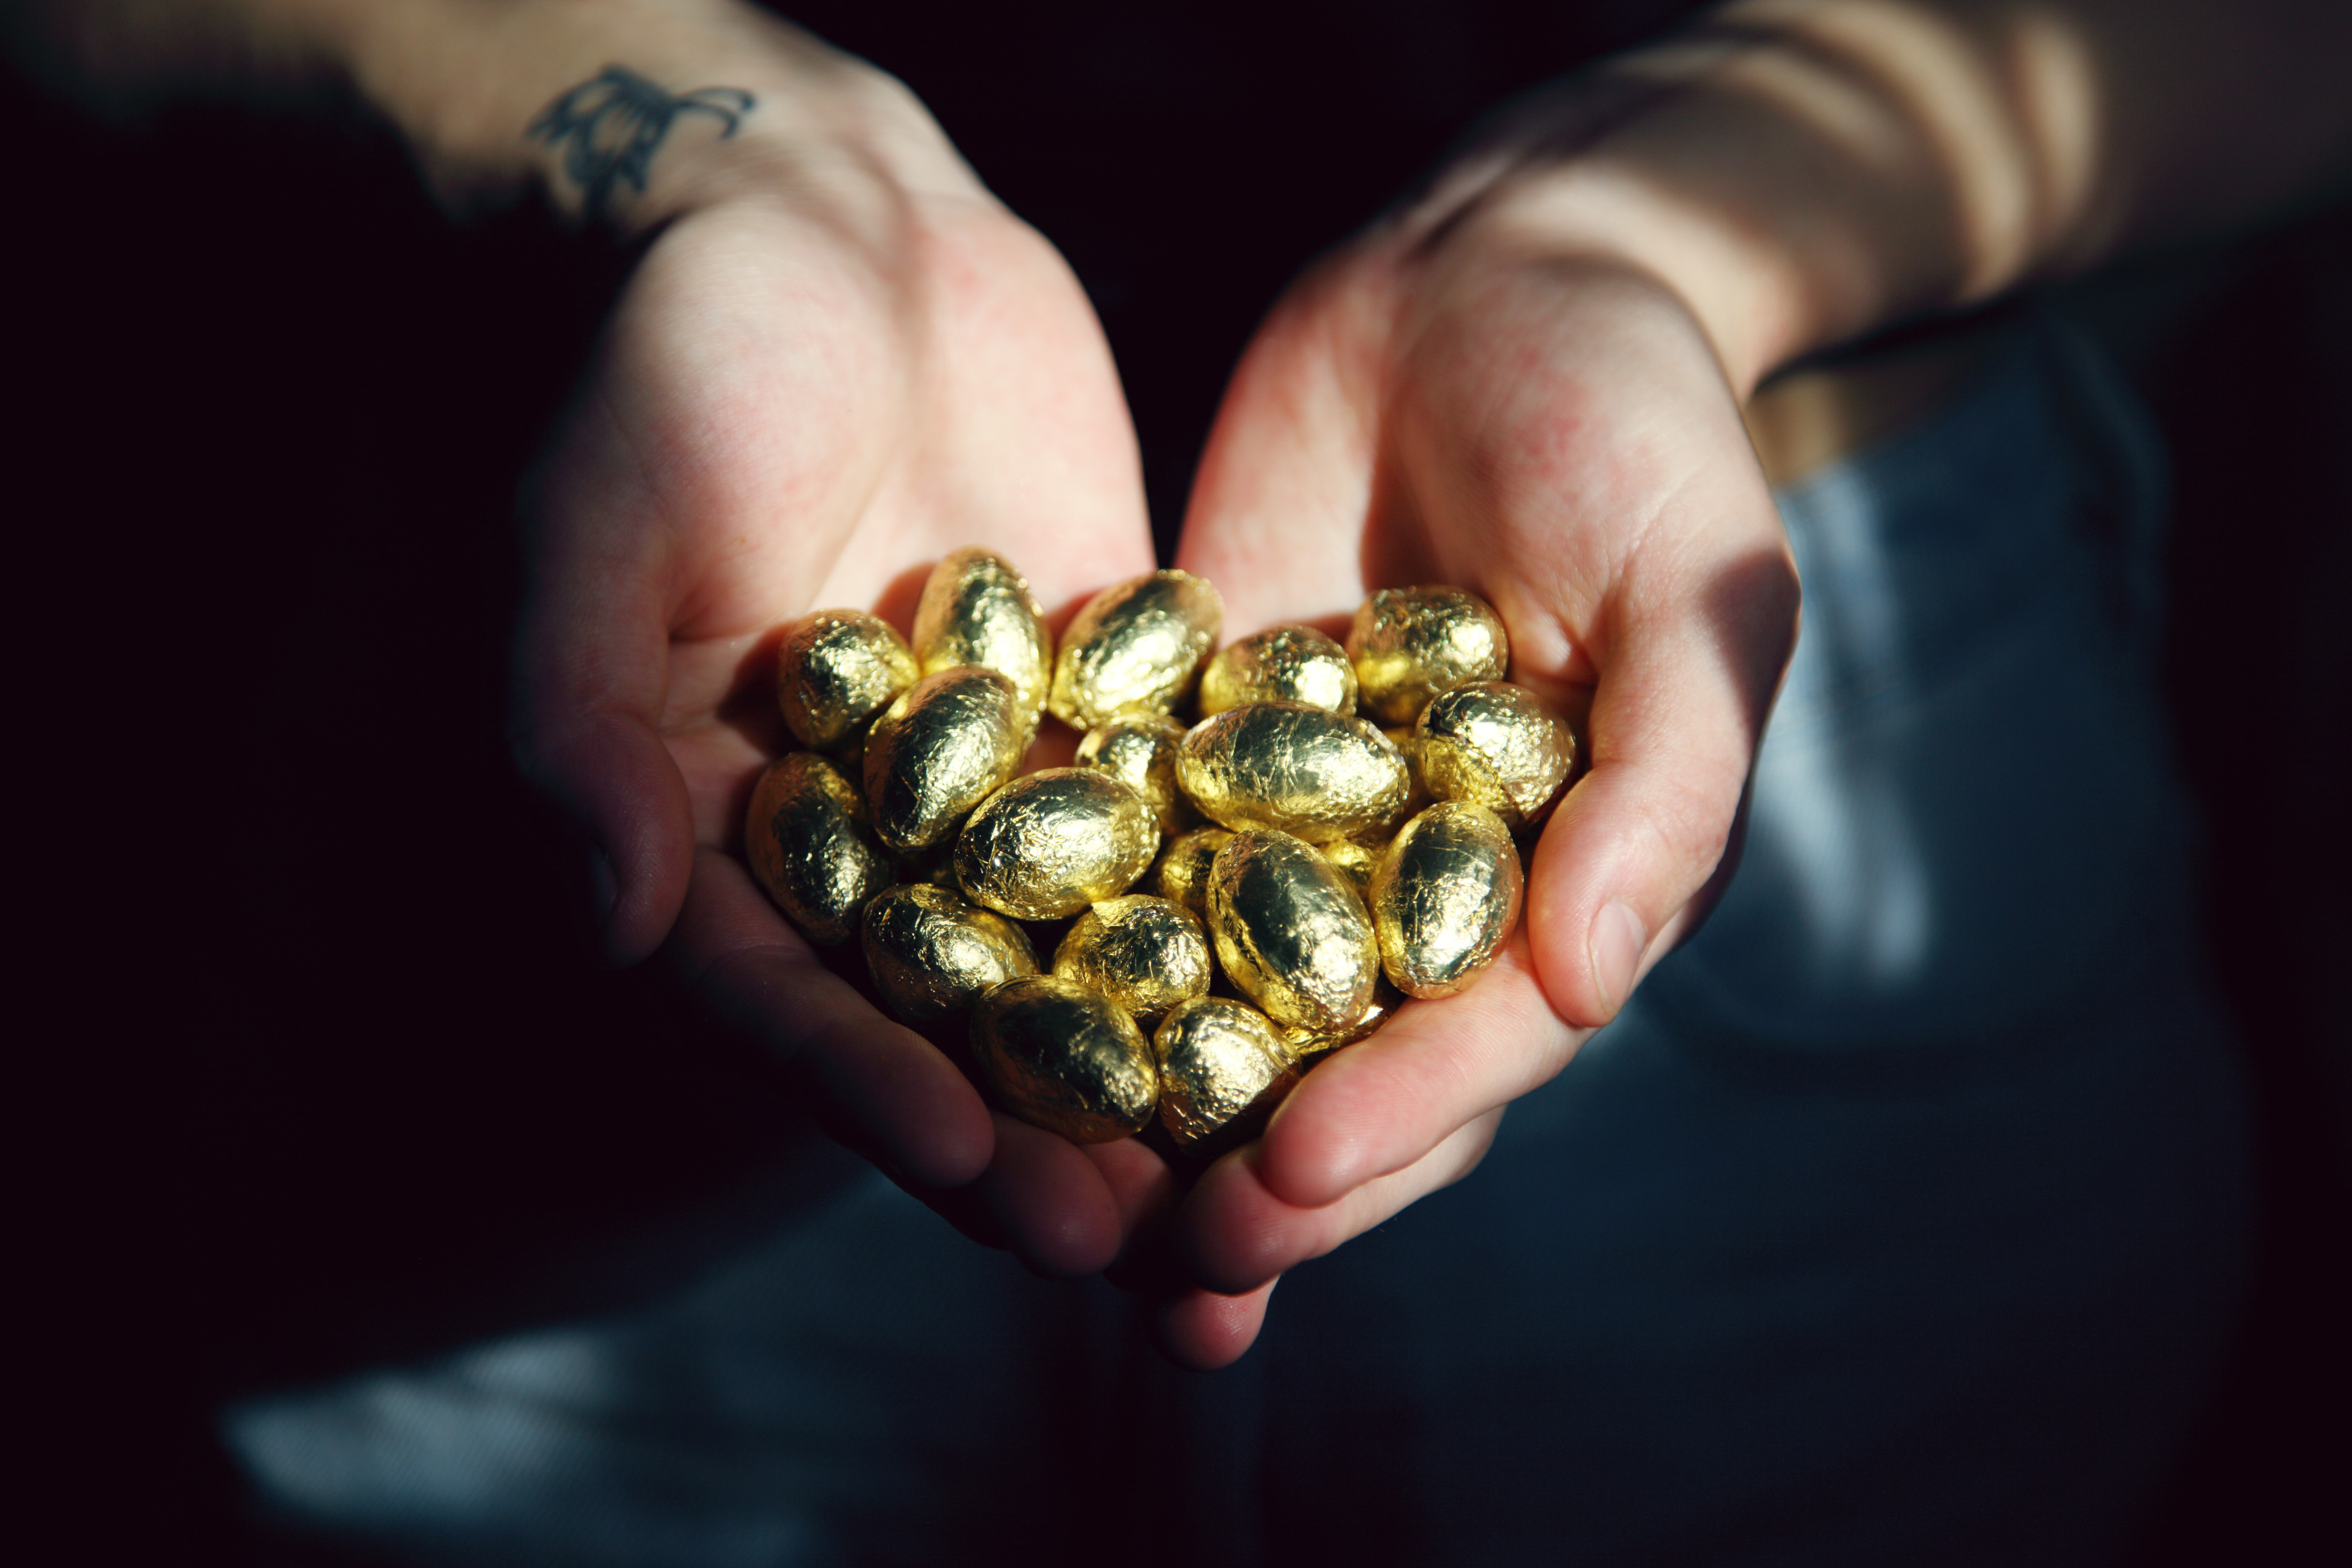 A pair of hands hold a small mound of tiny golden eggs